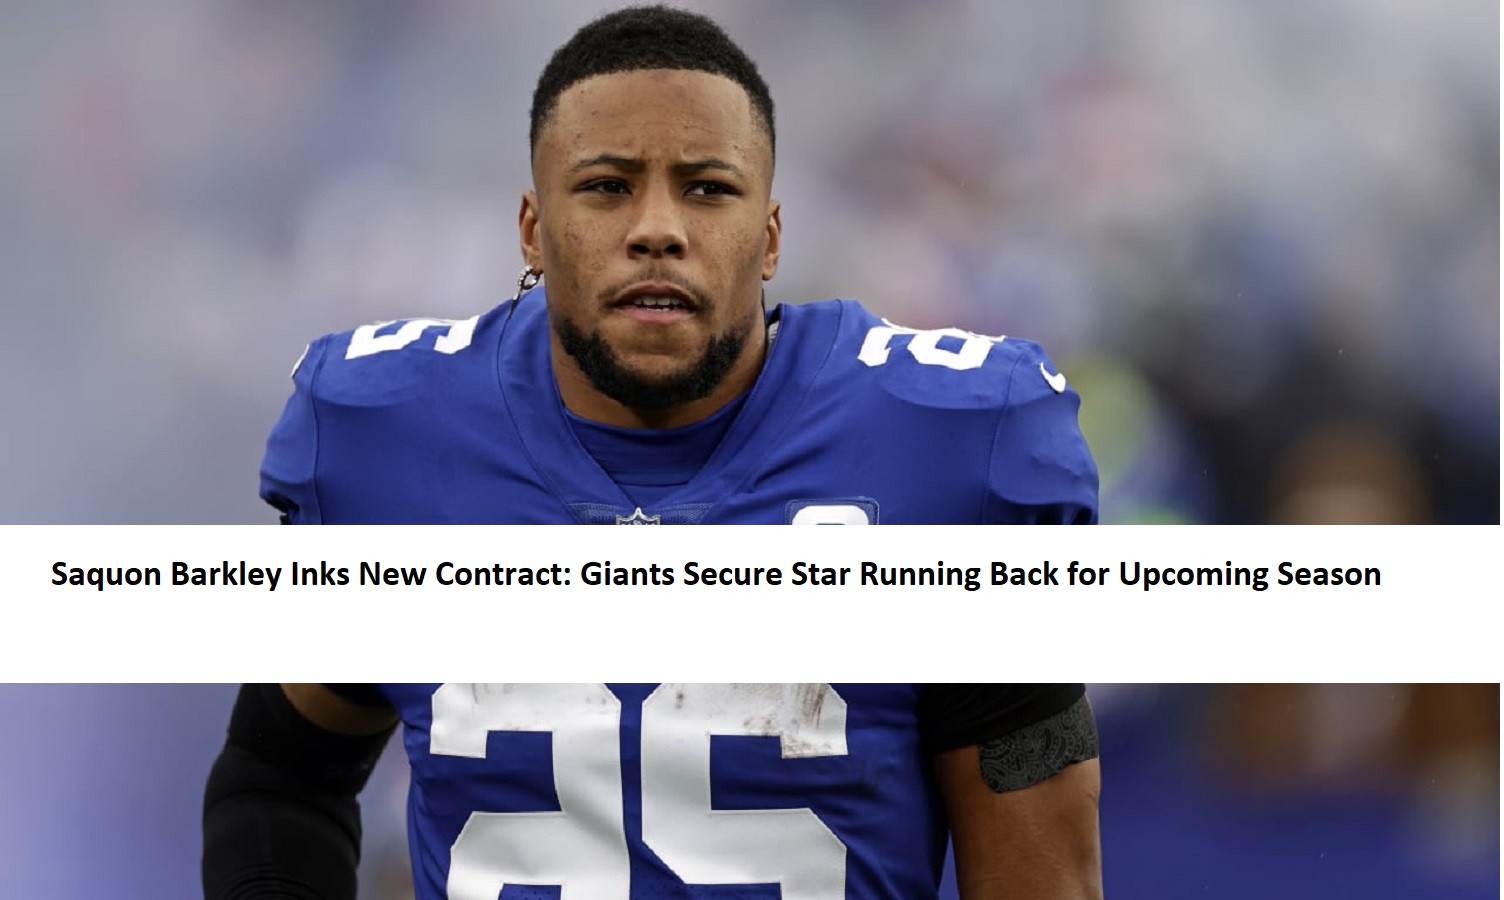 Saquon Barkley Inks New Contract: Giants Secure Star Running Back for Upcoming Season